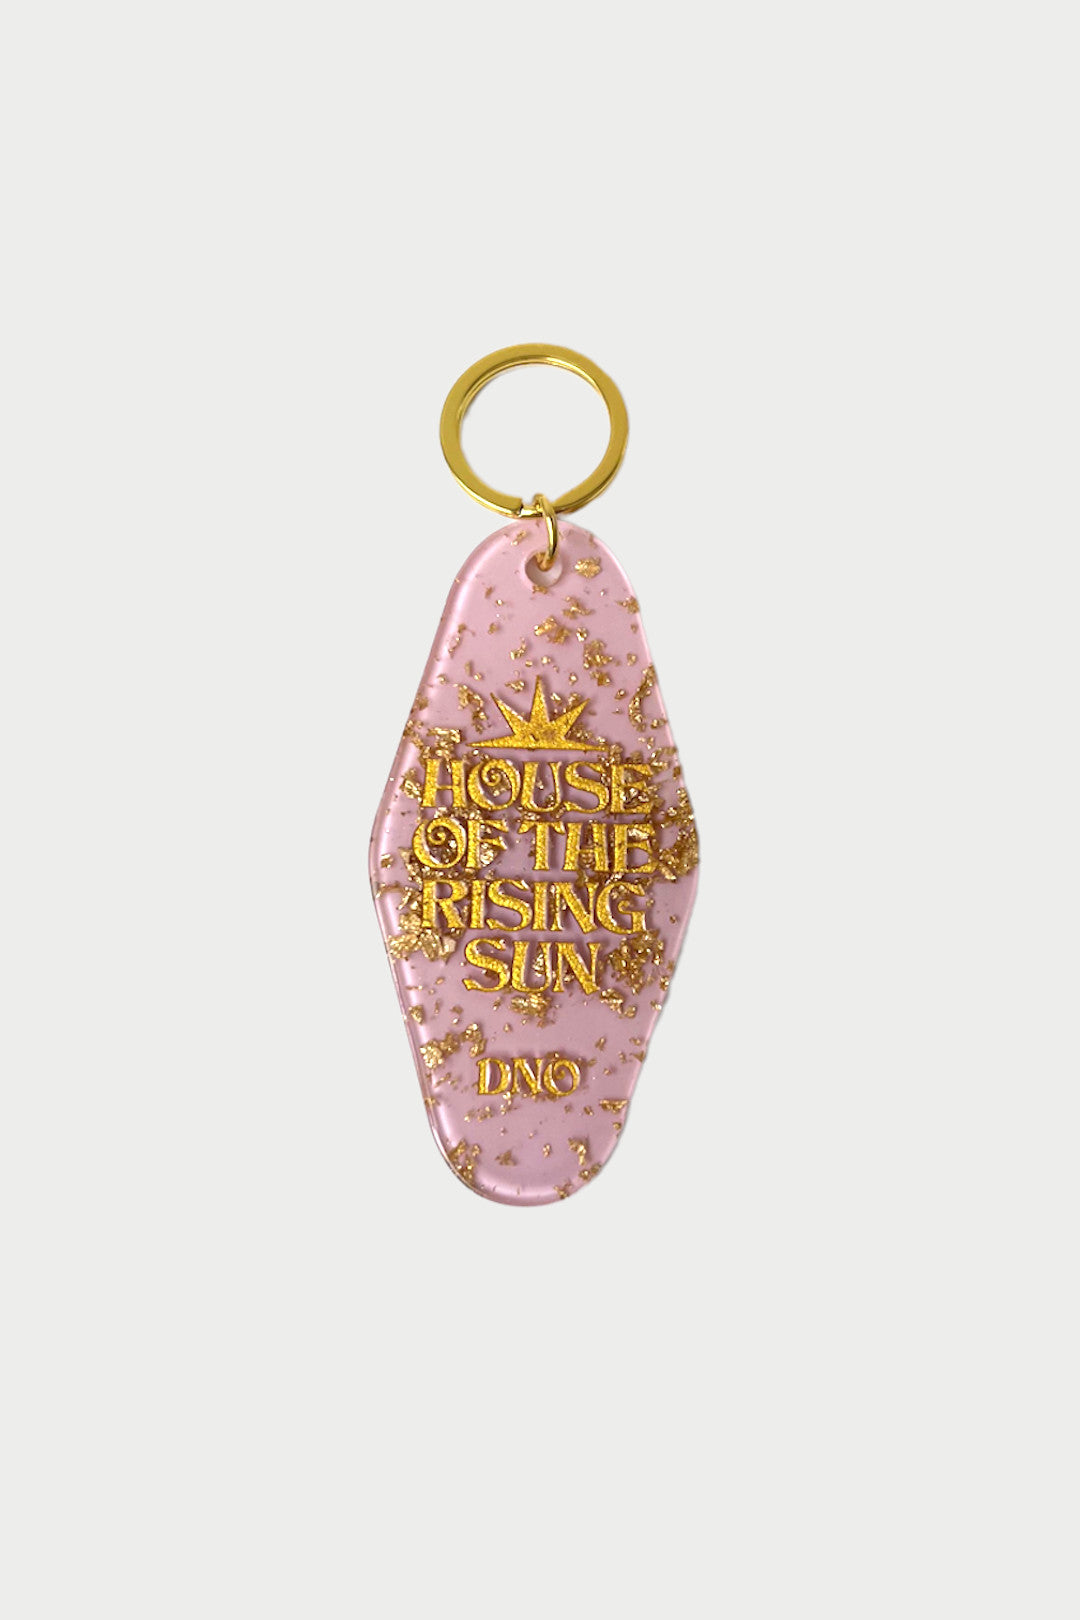 House of the Rising Sun Keychain